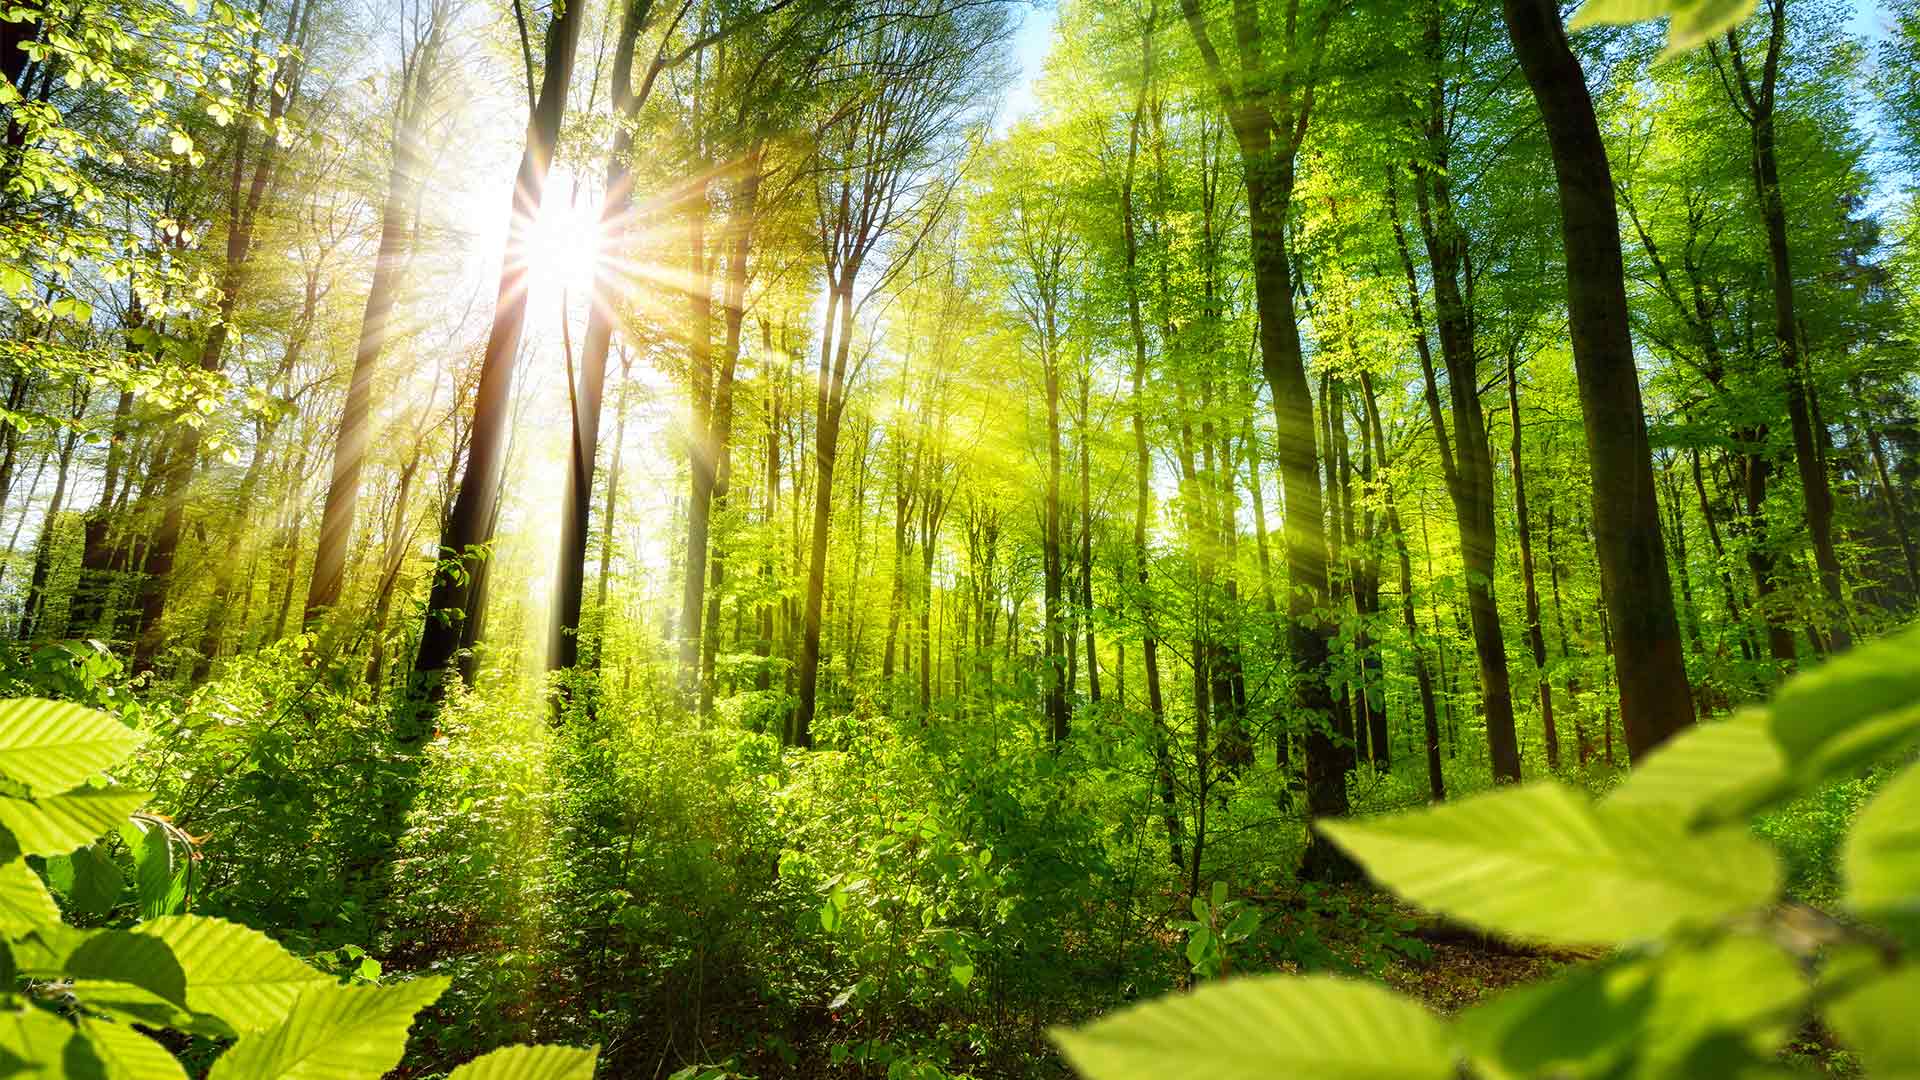 Green forest with sun shining through the trees